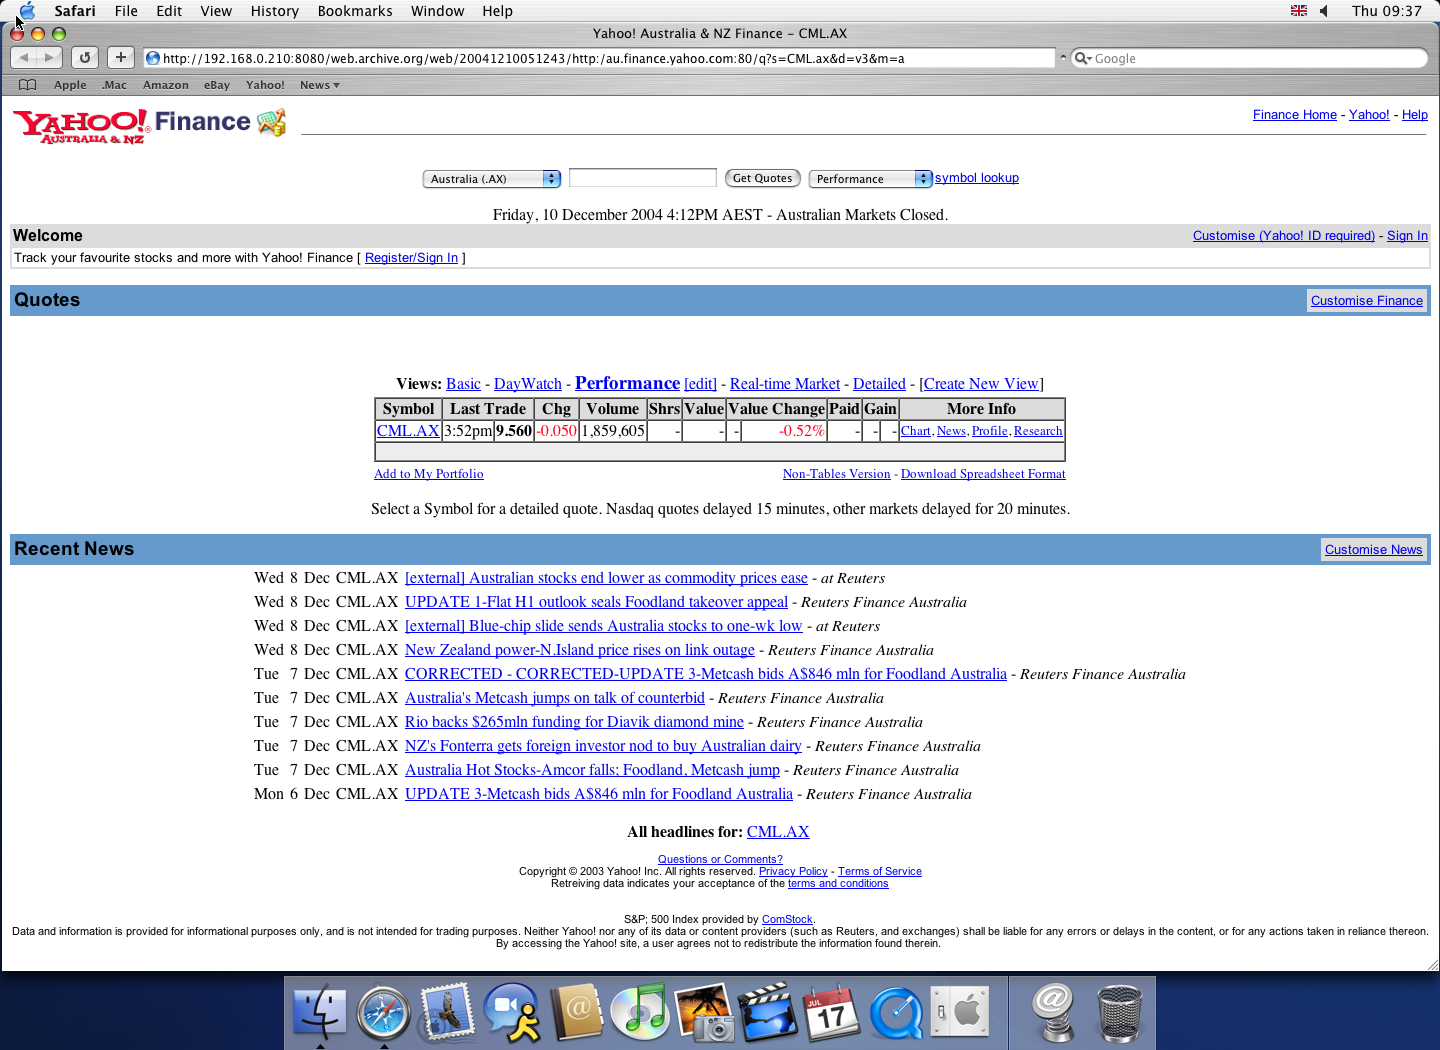 OS X 10.3 PPC with Safari 1.1 displaying a page from Yahoo archived at December 10, 2004 at 05:12:43